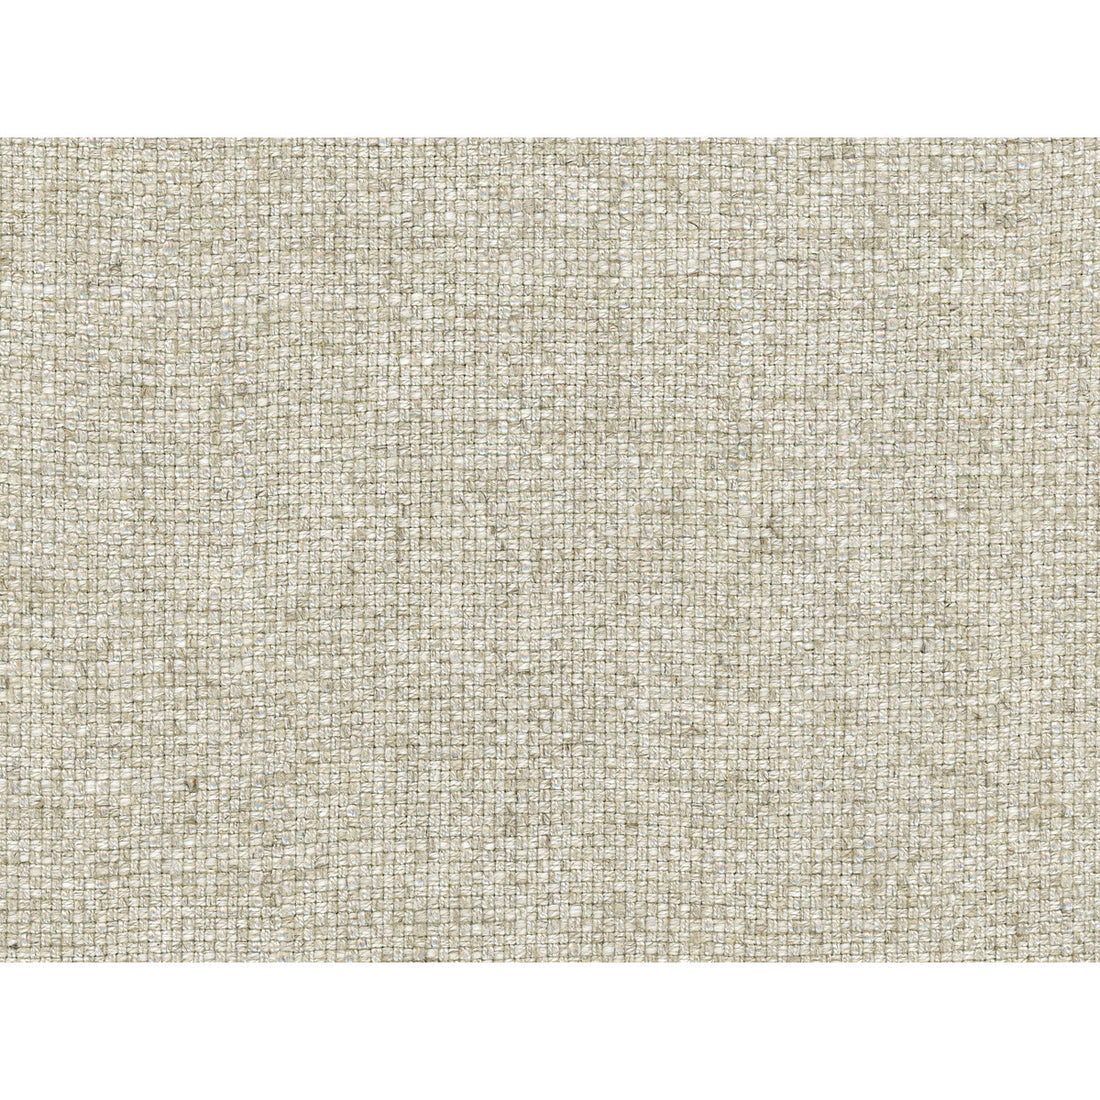 Plush Linen fabric in chardonnay color - pattern 31816.116.0 - by Kravet Couture